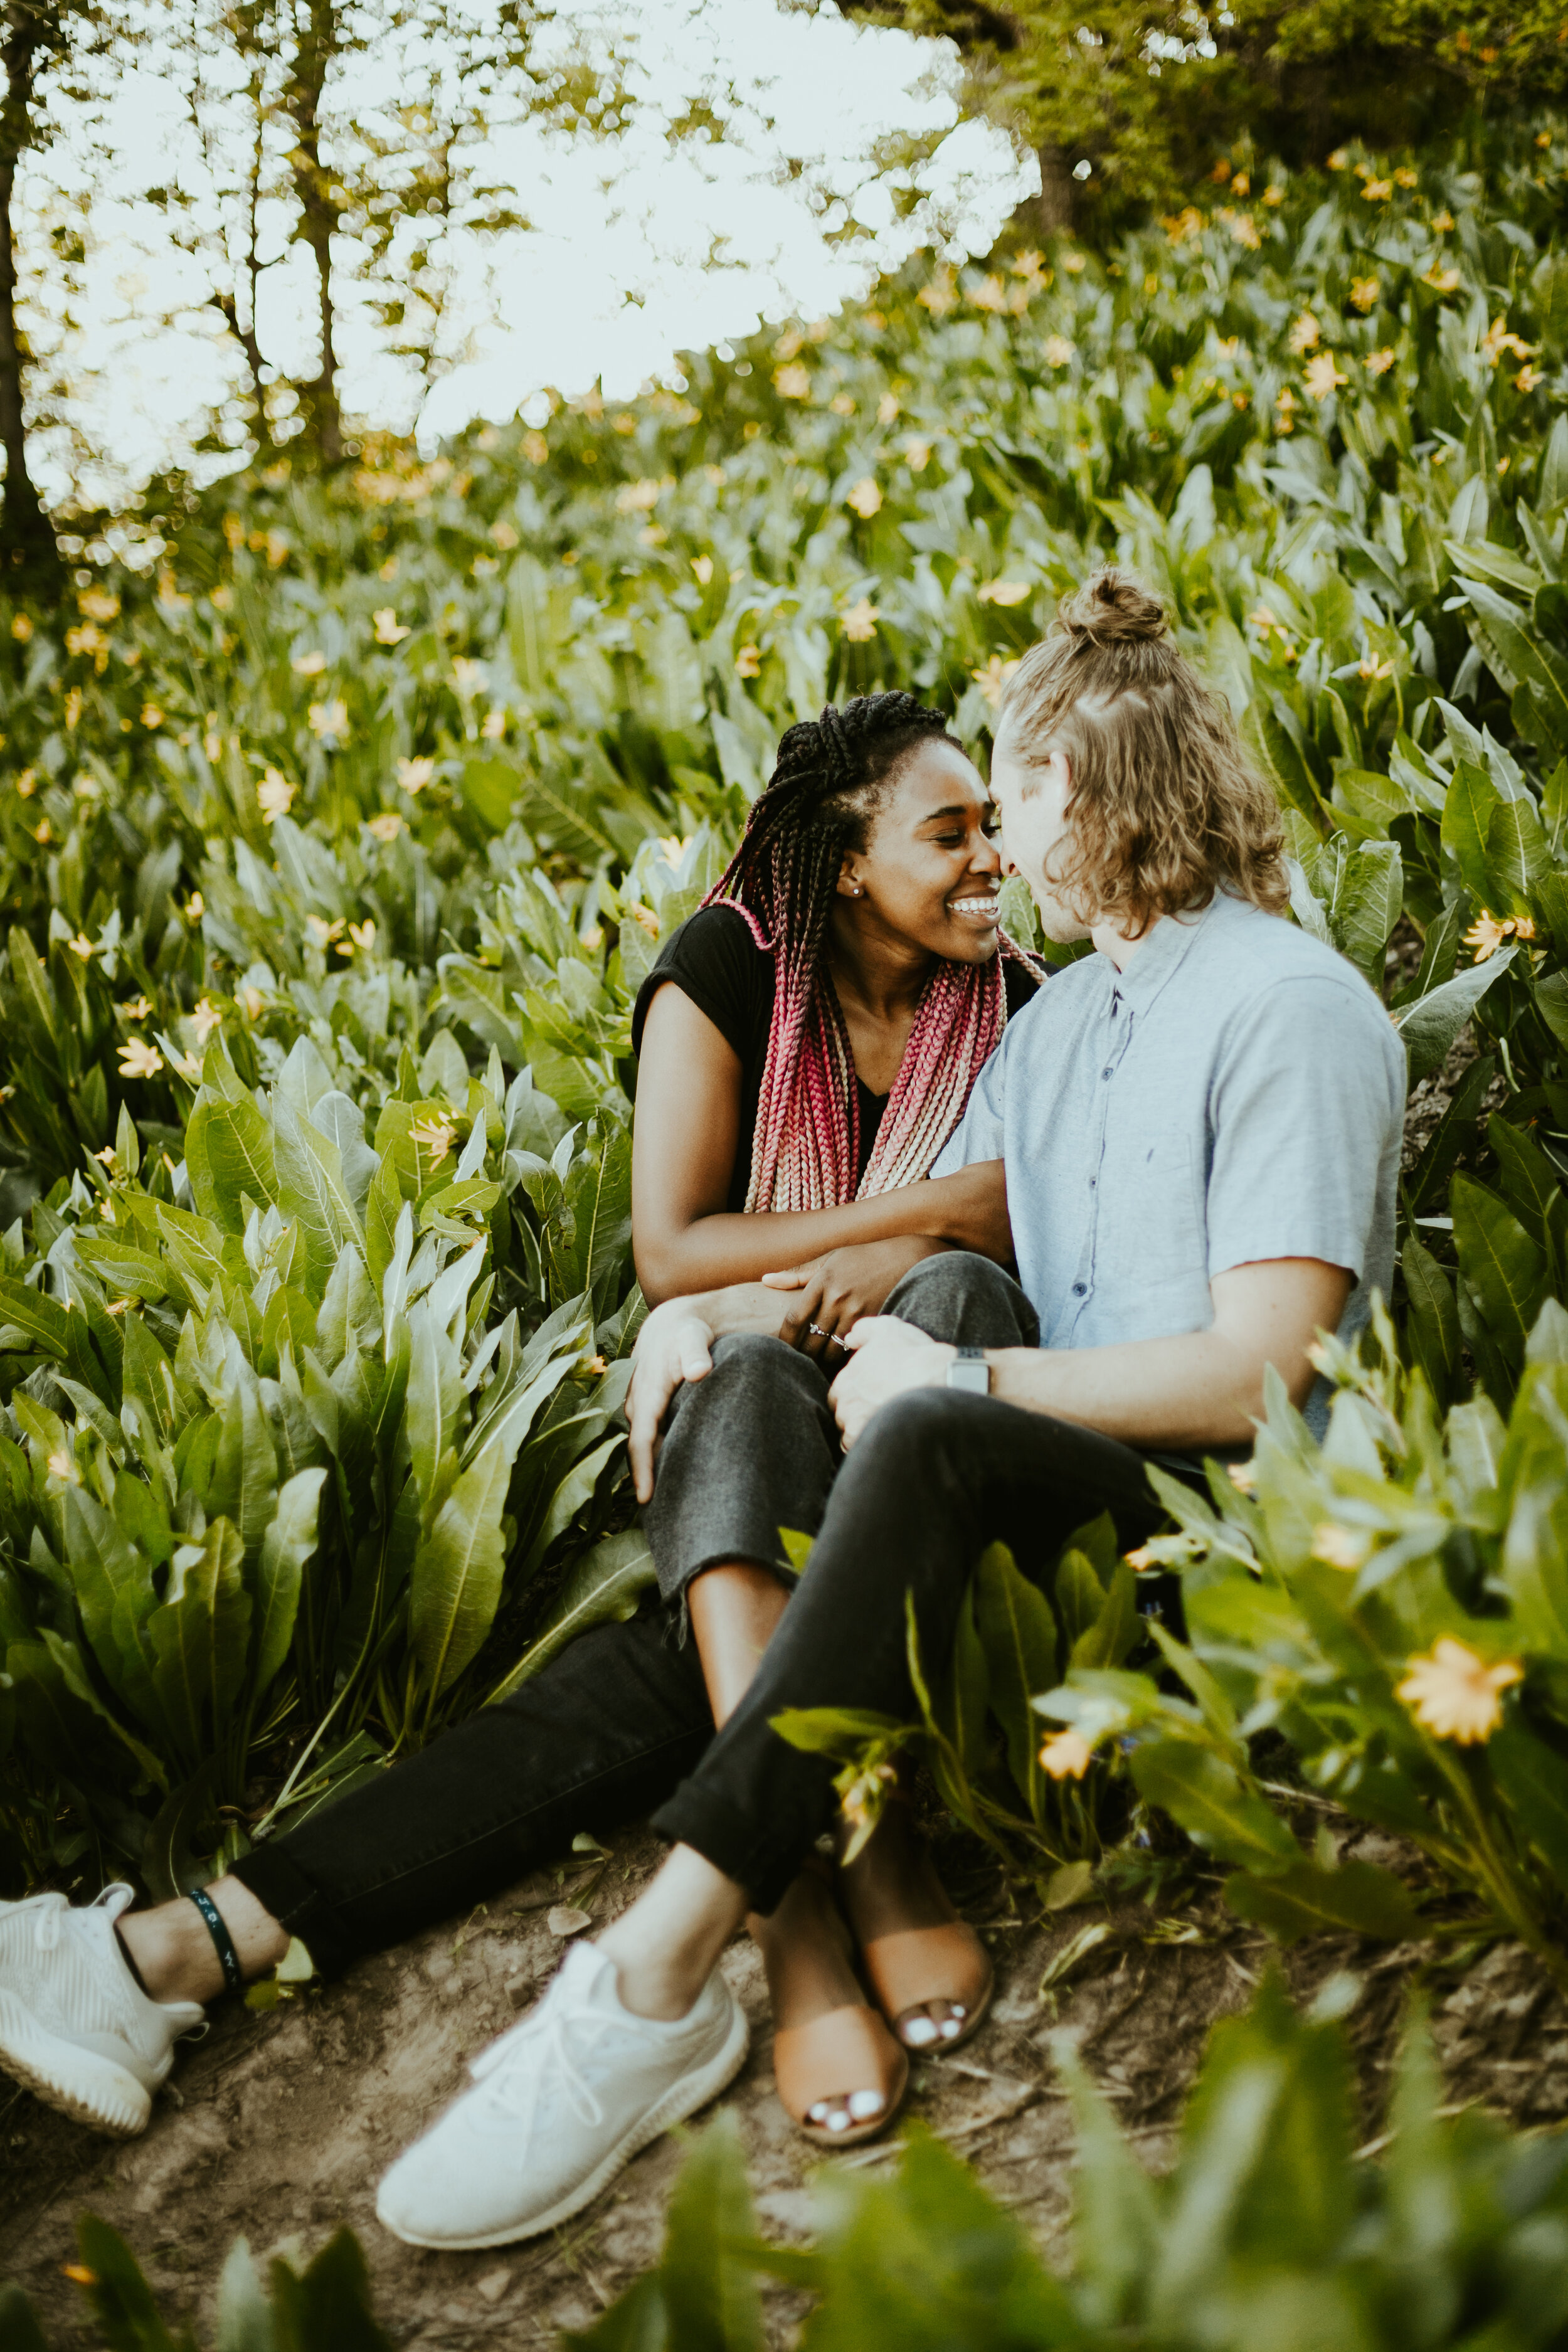 Outdoor Couples Photoshoot Ideas Why You Should Escape The City — Frankely Photography